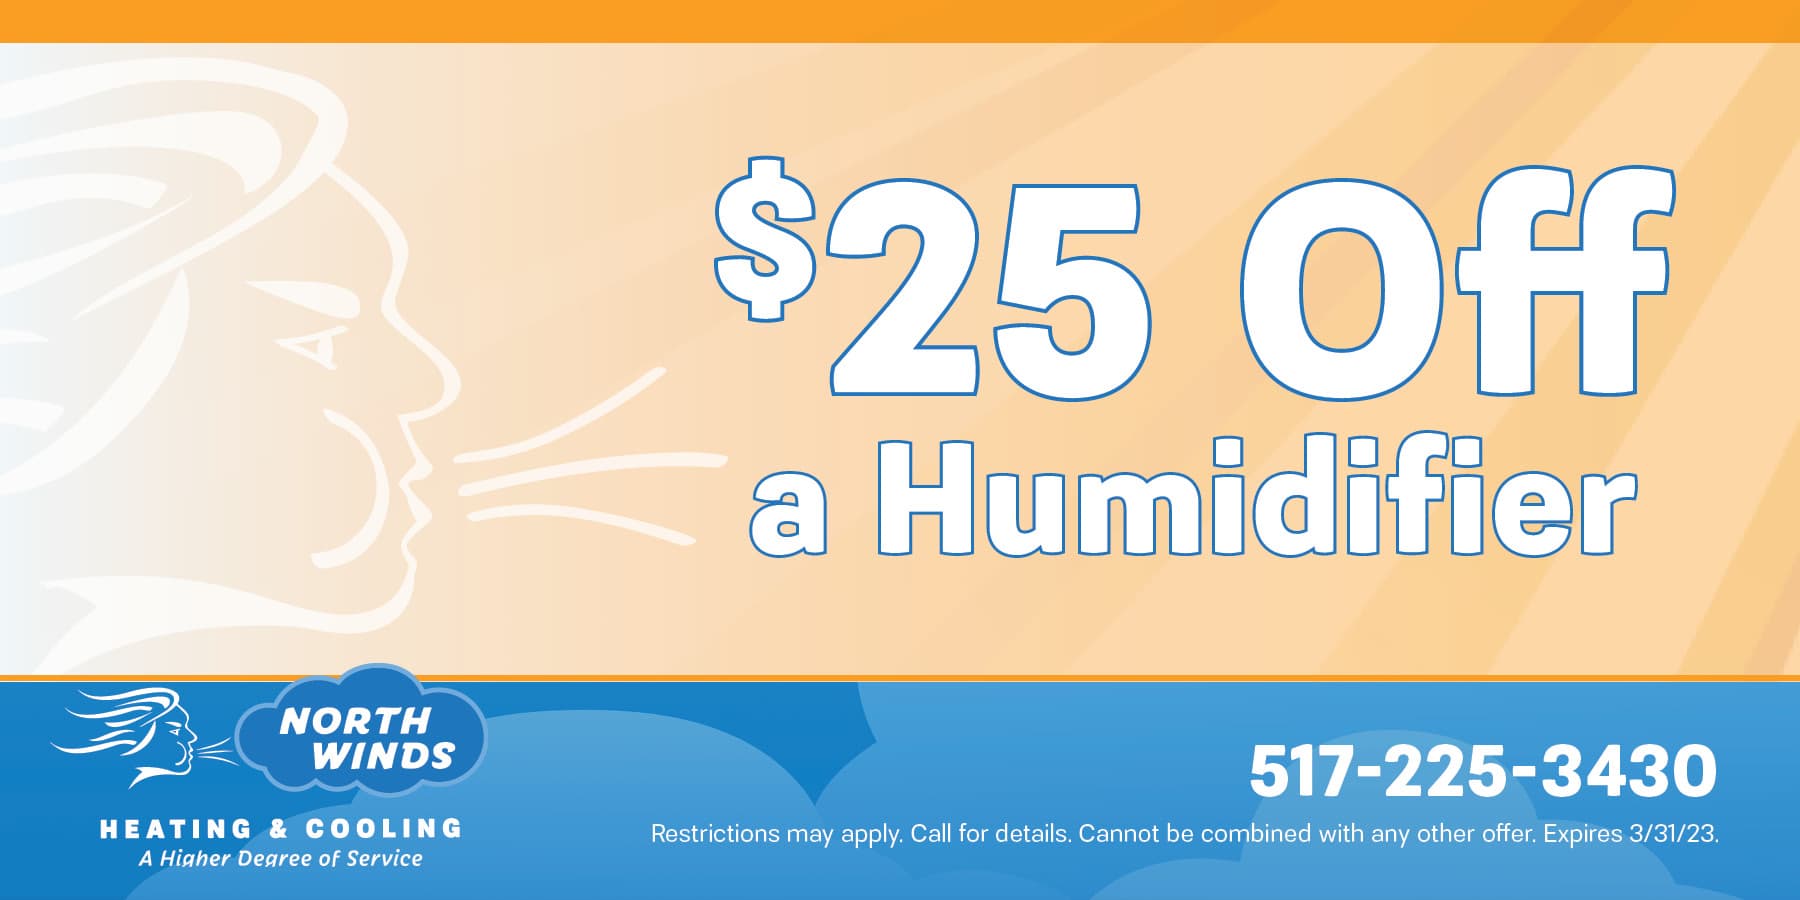 twenty five dollars off a humidifier. restrictions may apply. call for details. cannot be combined with any other offer. expires march thirty one, twenty twenty three